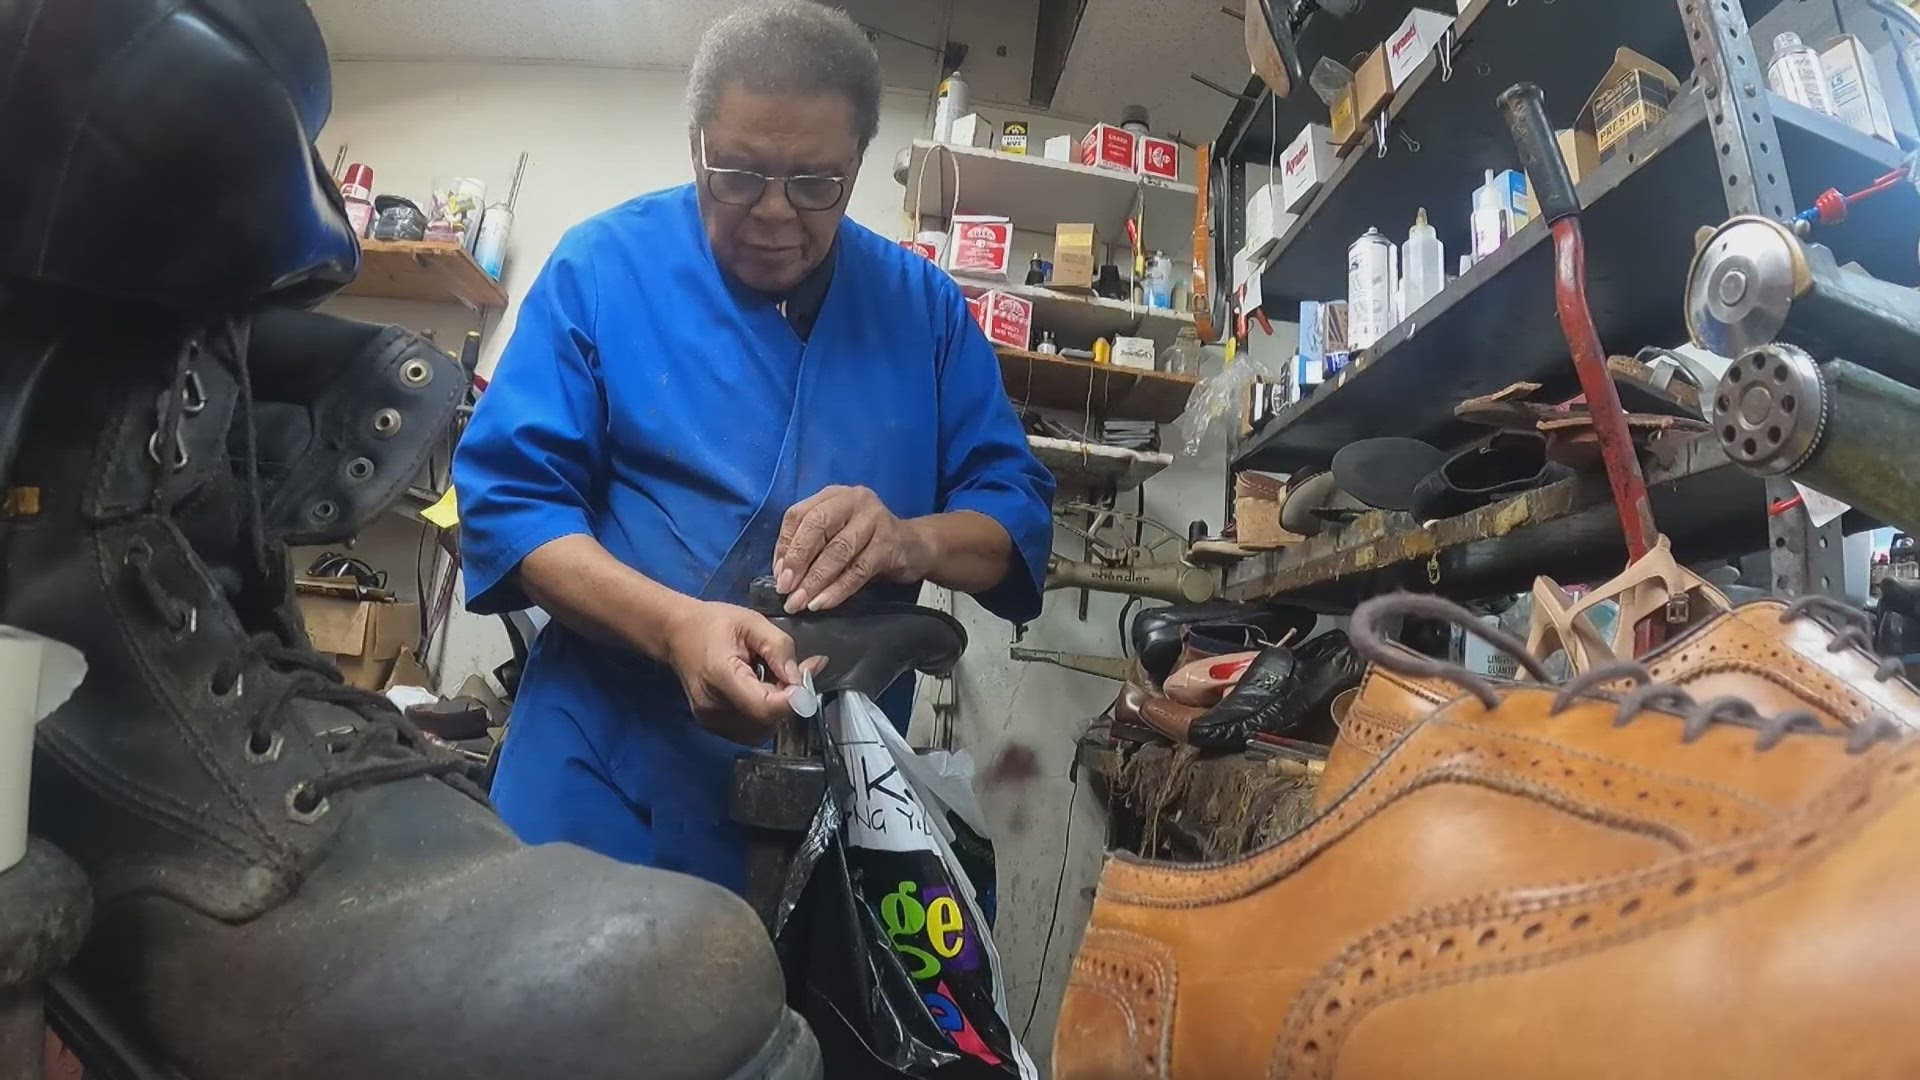 Robert "Shoeman" Moody has been able to thrive in downtown St. Louis for five decades as a cobbler. He puts his heart and soul into his work repairing shoes.